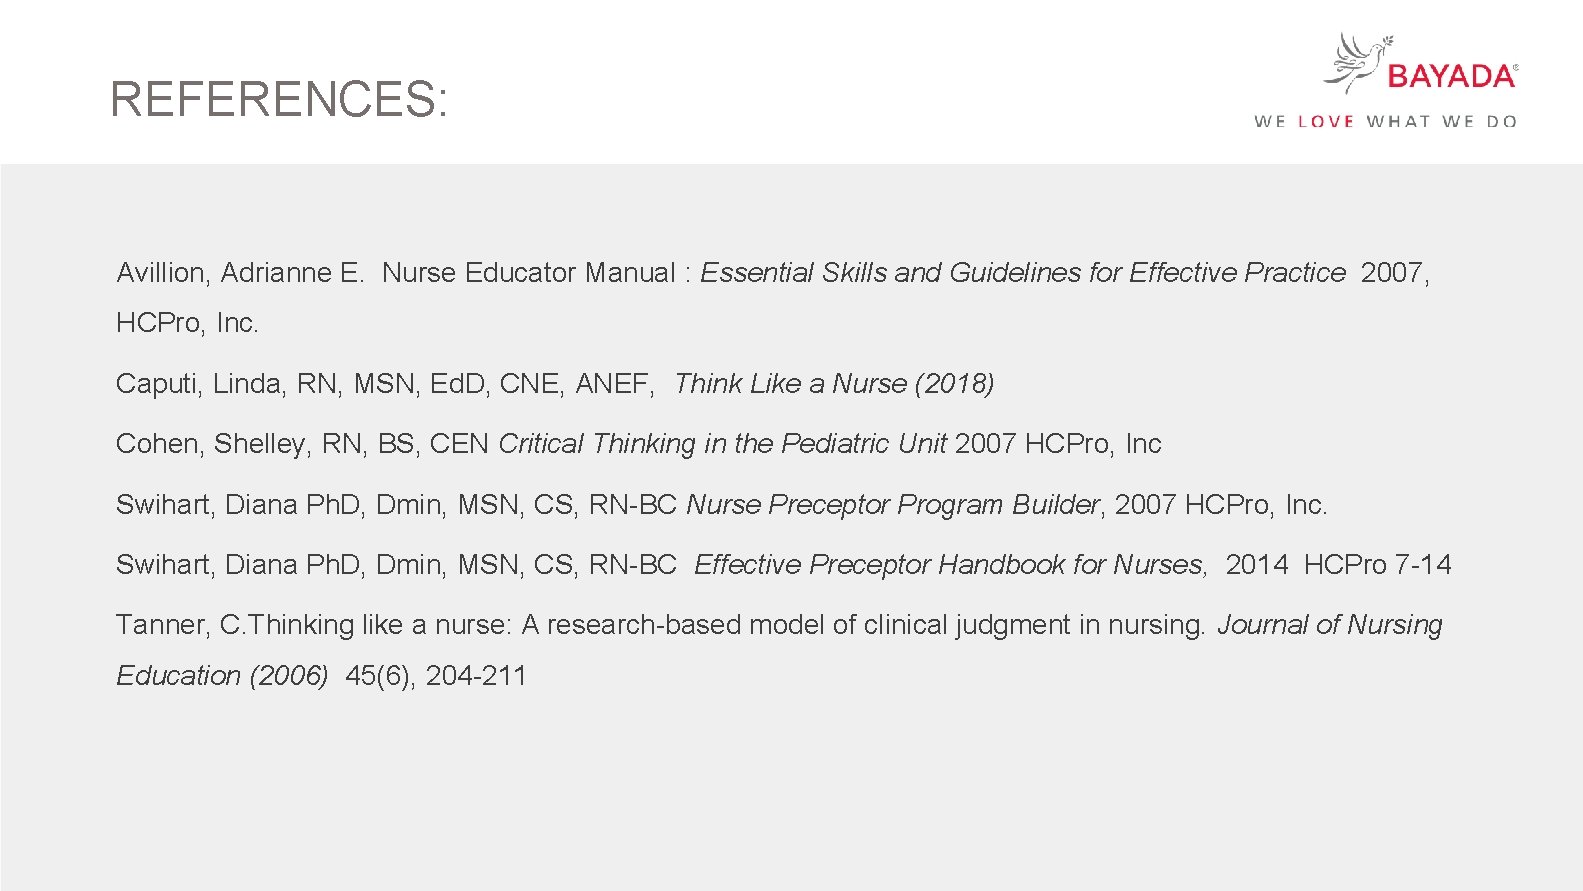 REFERENCES: Avillion, Adrianne E. Nurse Educator Manual : Essential Skills and Guidelines for Effective